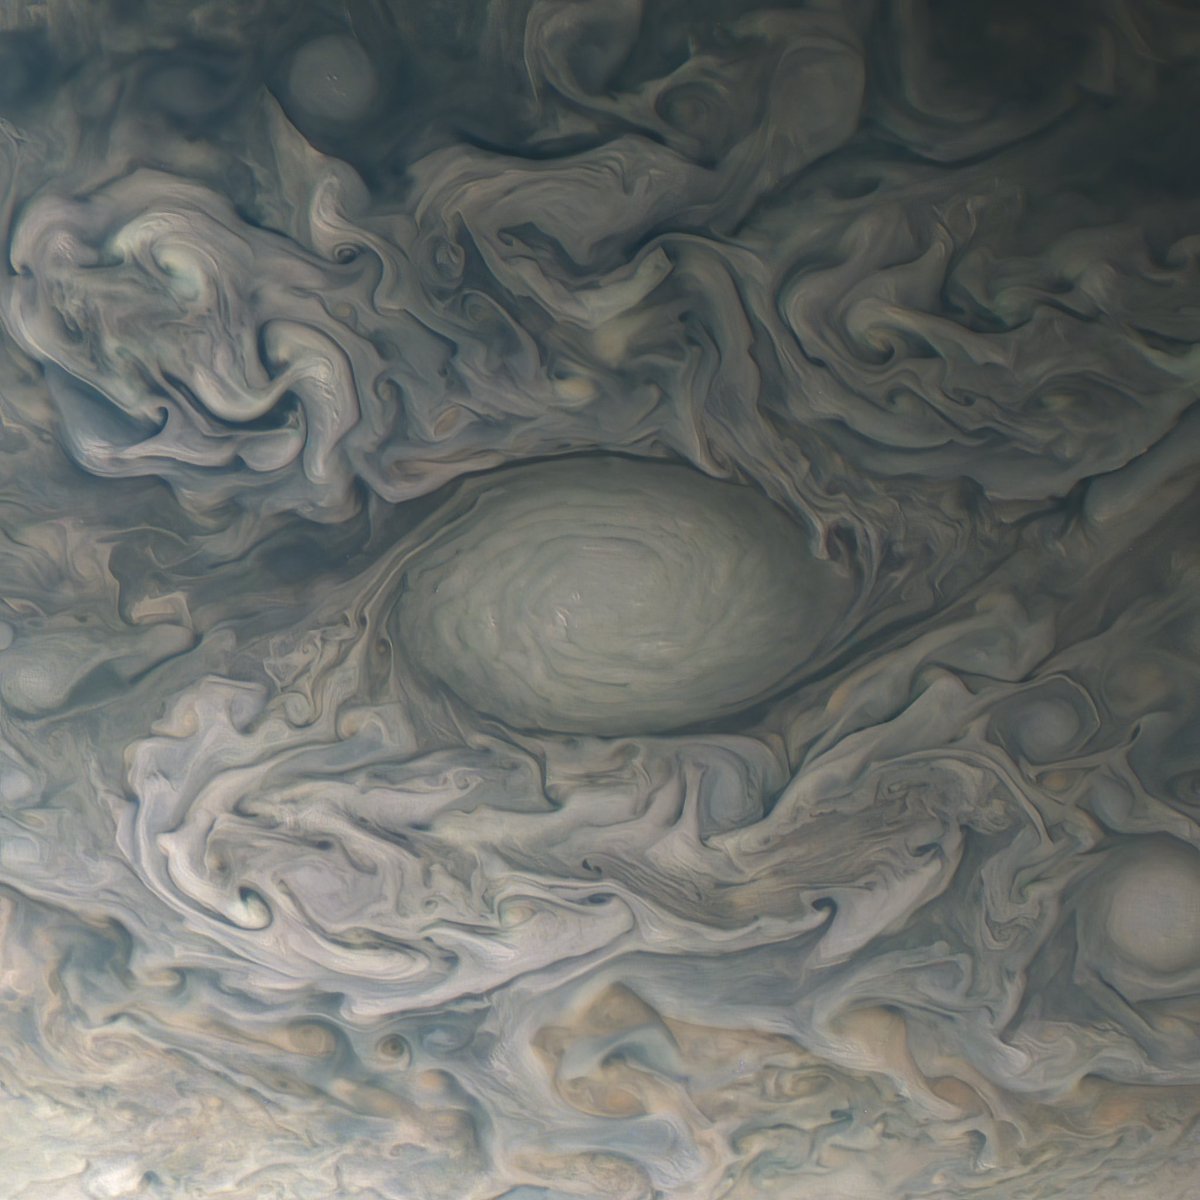 A massive storm, large enough to swallow most of North America, was spotted in Jupiter’s northern latitudes by the Juno spacecraft on May 12th. NASA/JPL-Caltech/SwRI/MSSS/Kevin M. Gill